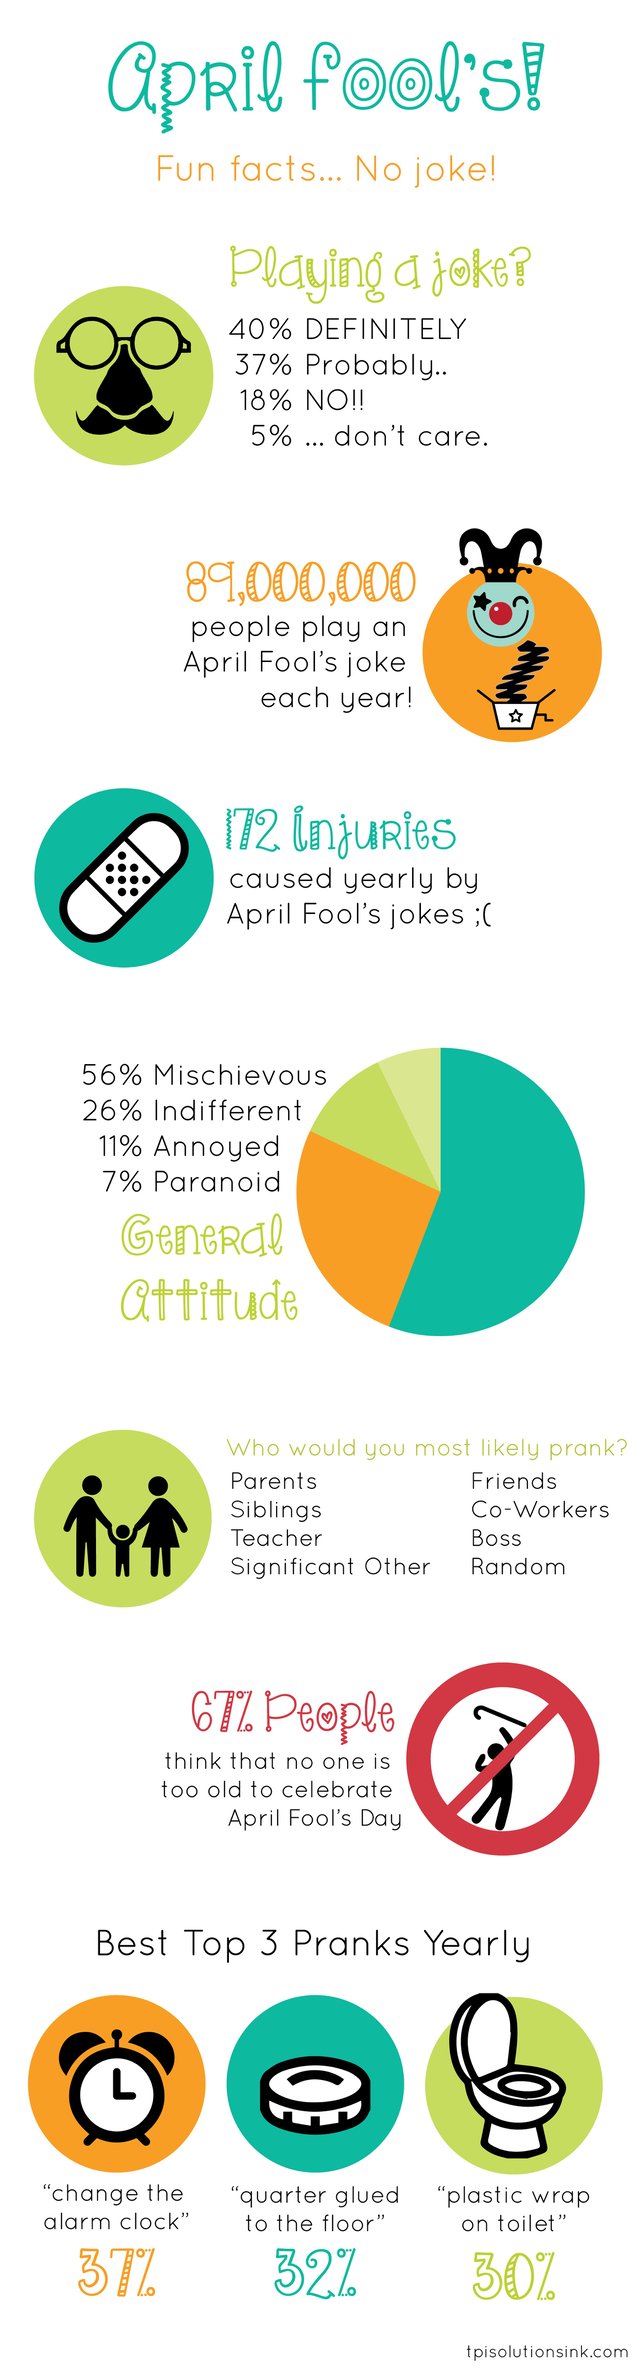 April Fool's Day Fun Facts Infographic